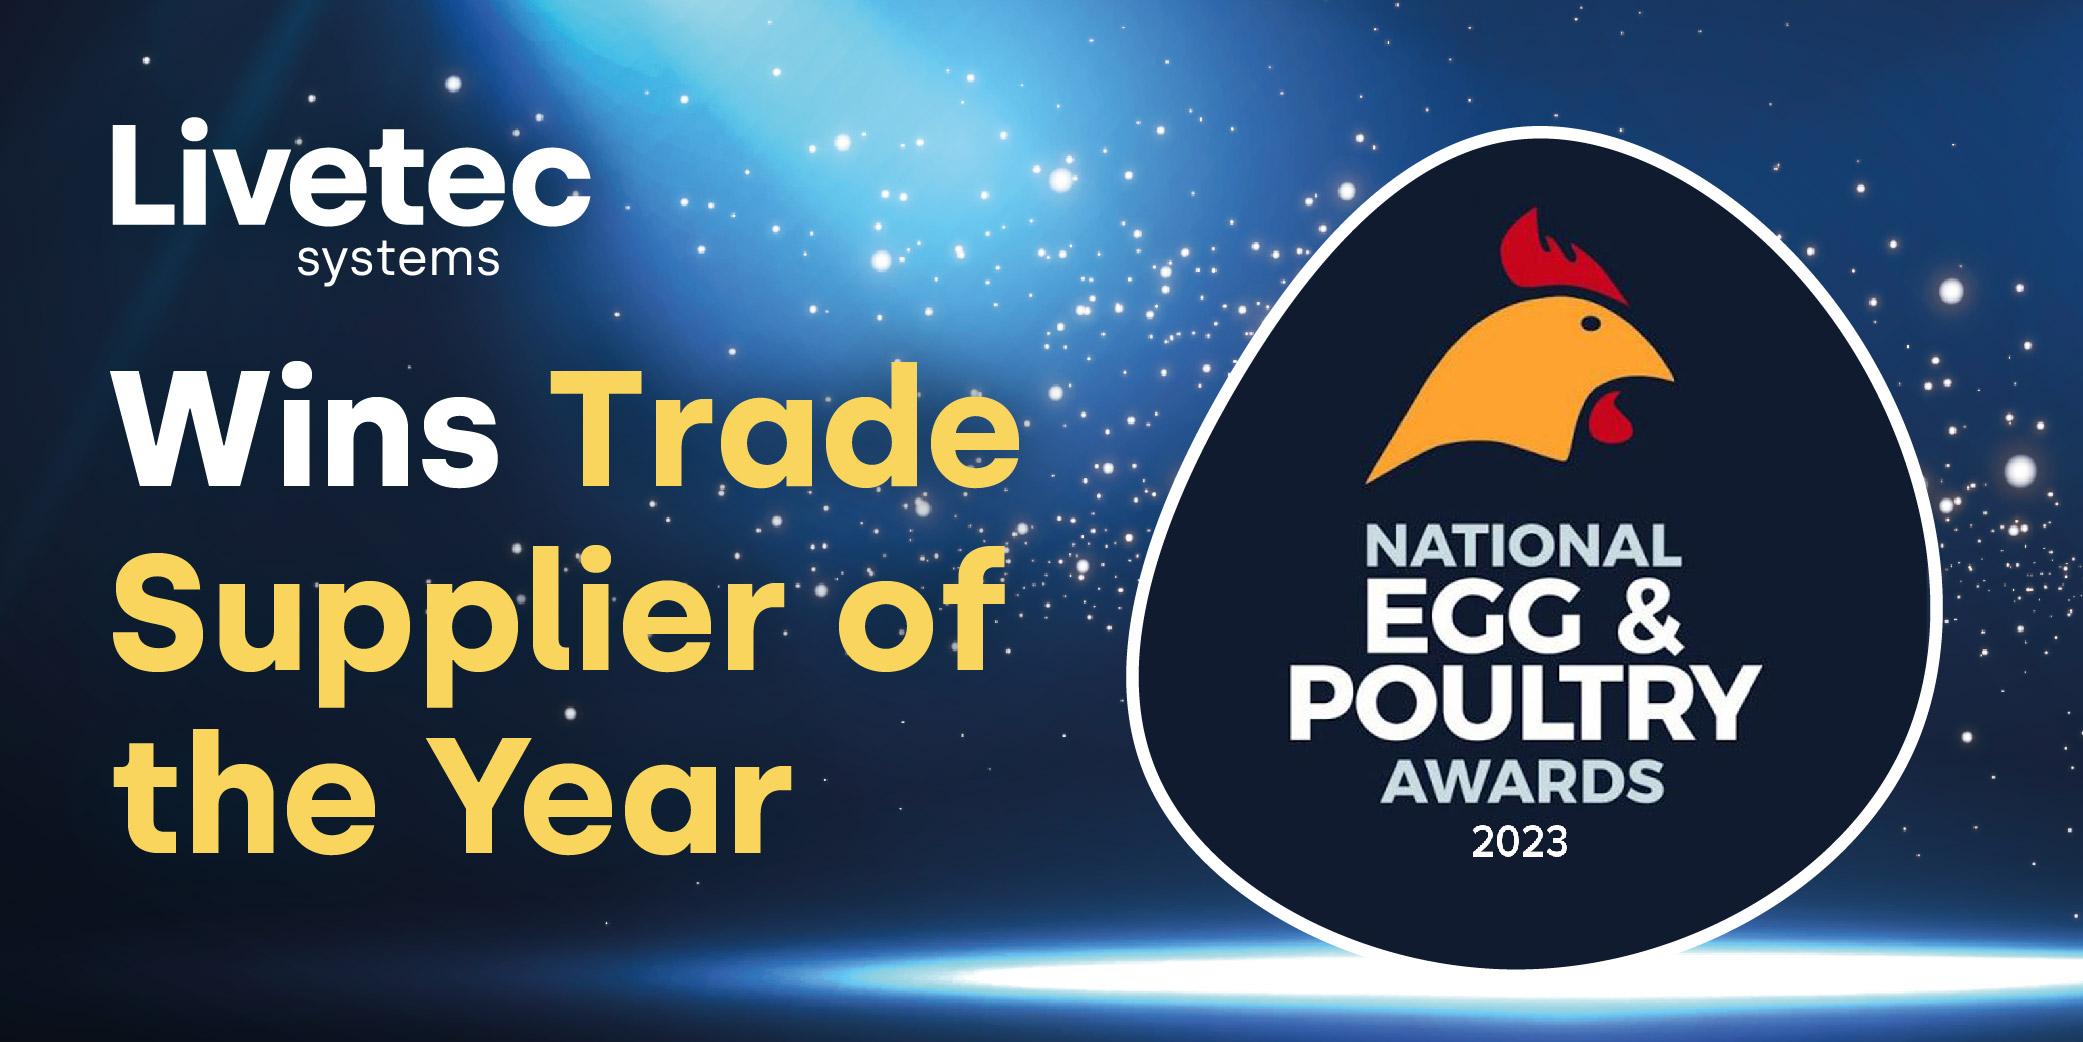 Livetec wins the Trade Supplier of the Year award